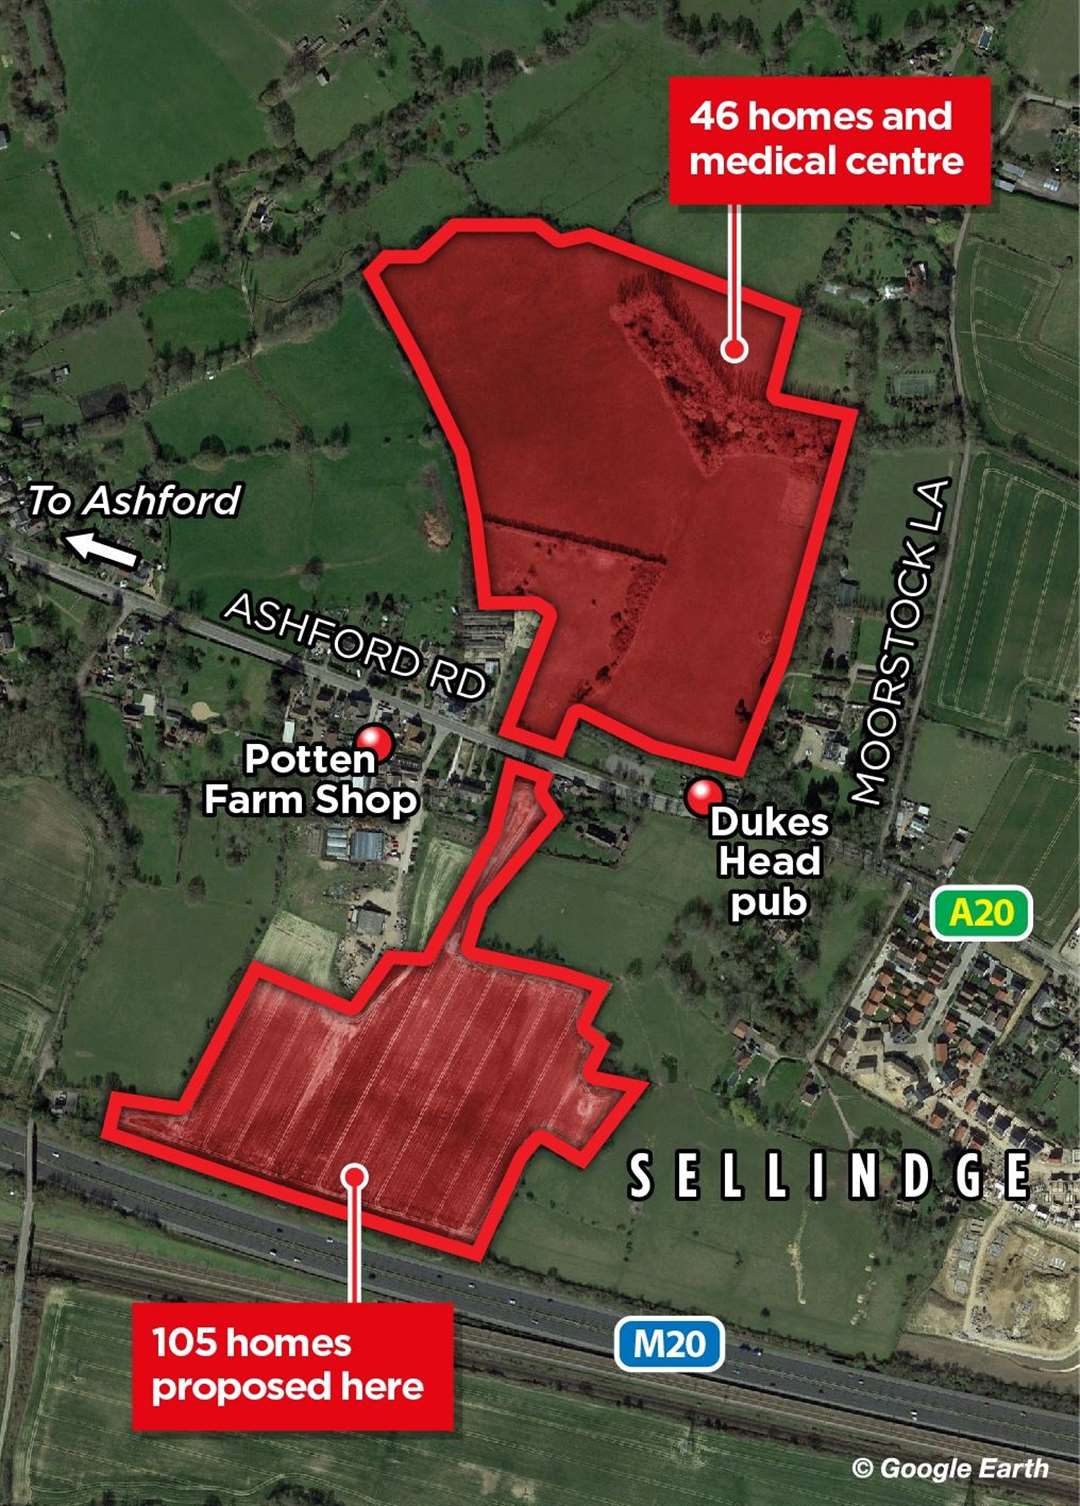 Two sites along the A20 are earmarked for development